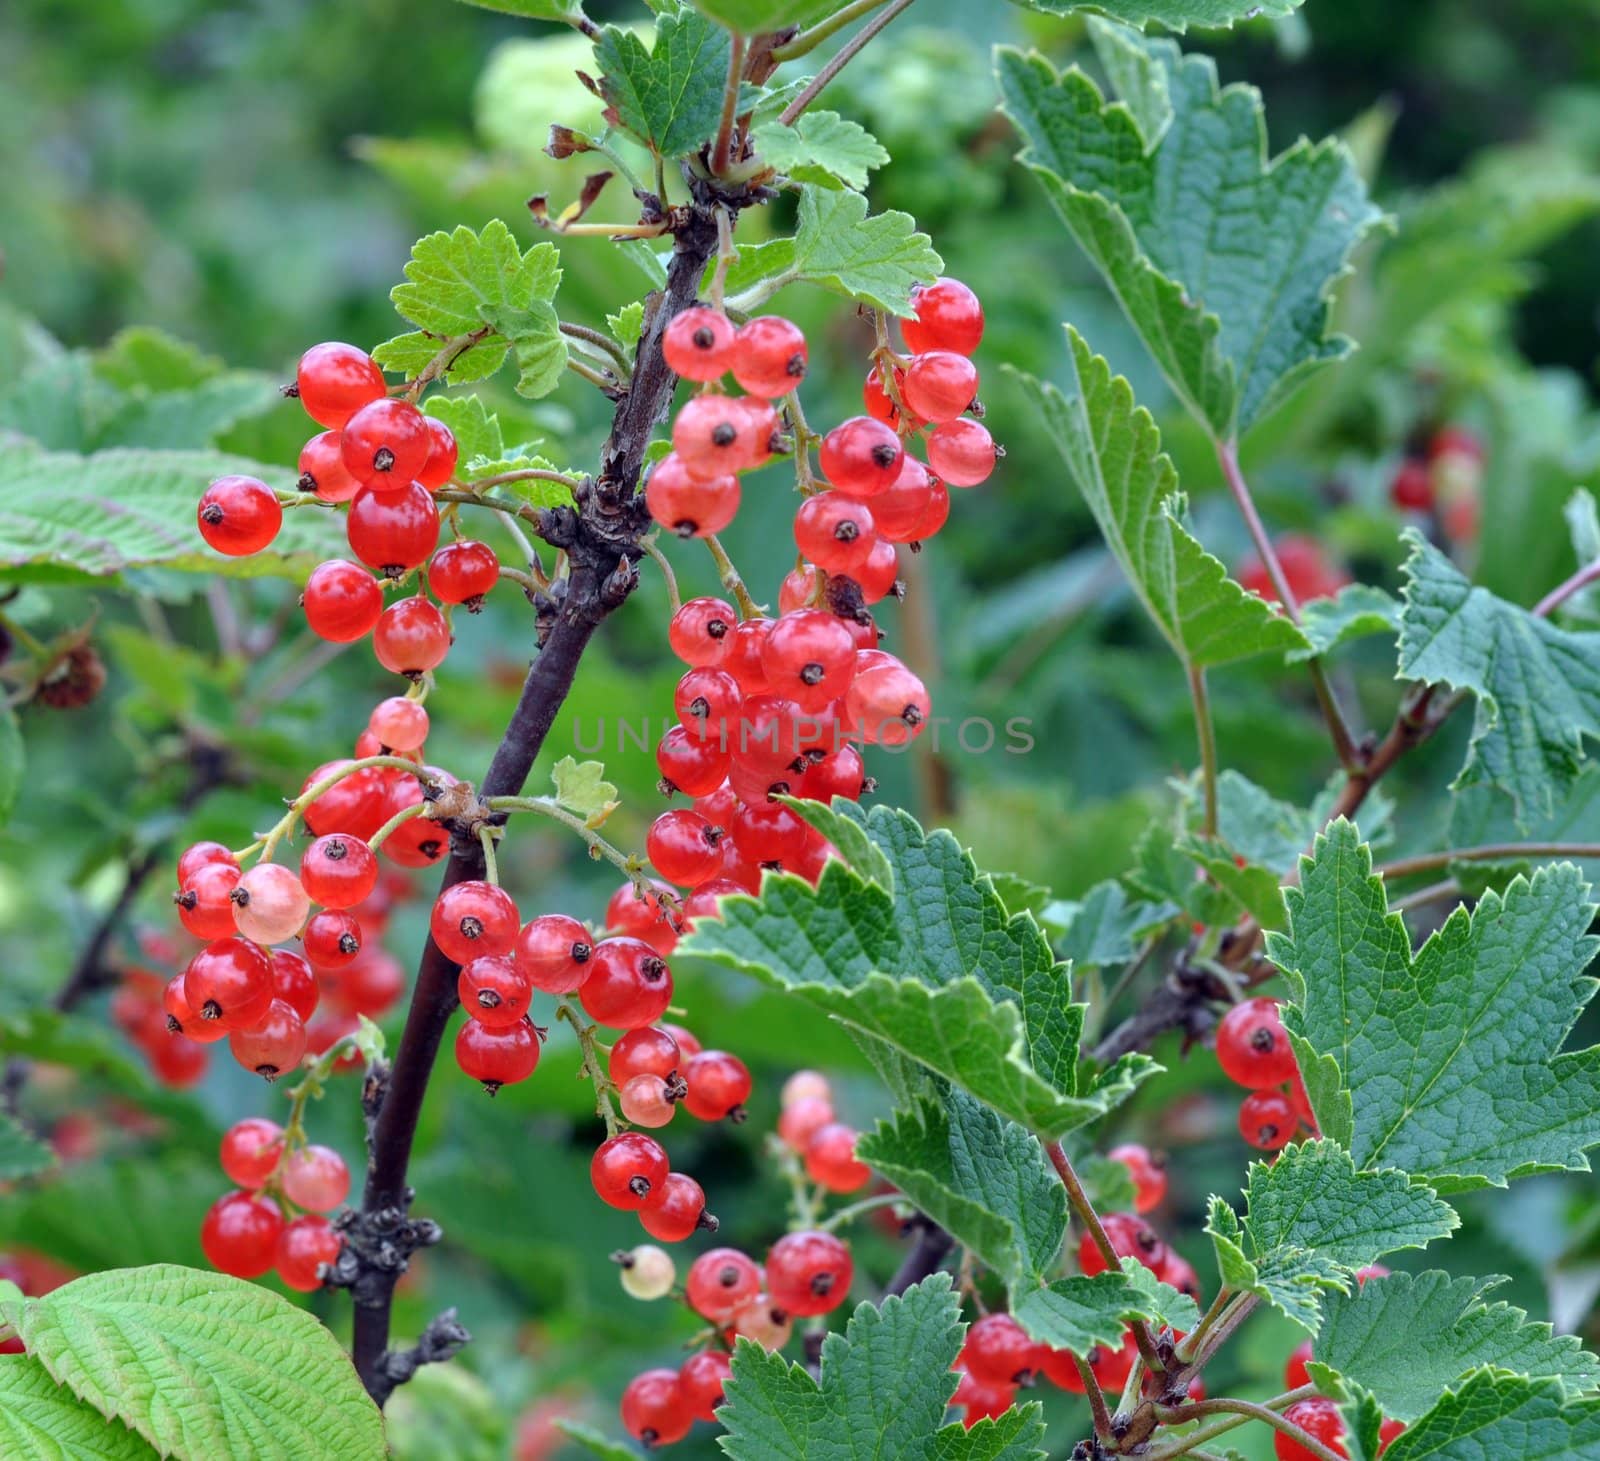 Red currant by alexcoolok